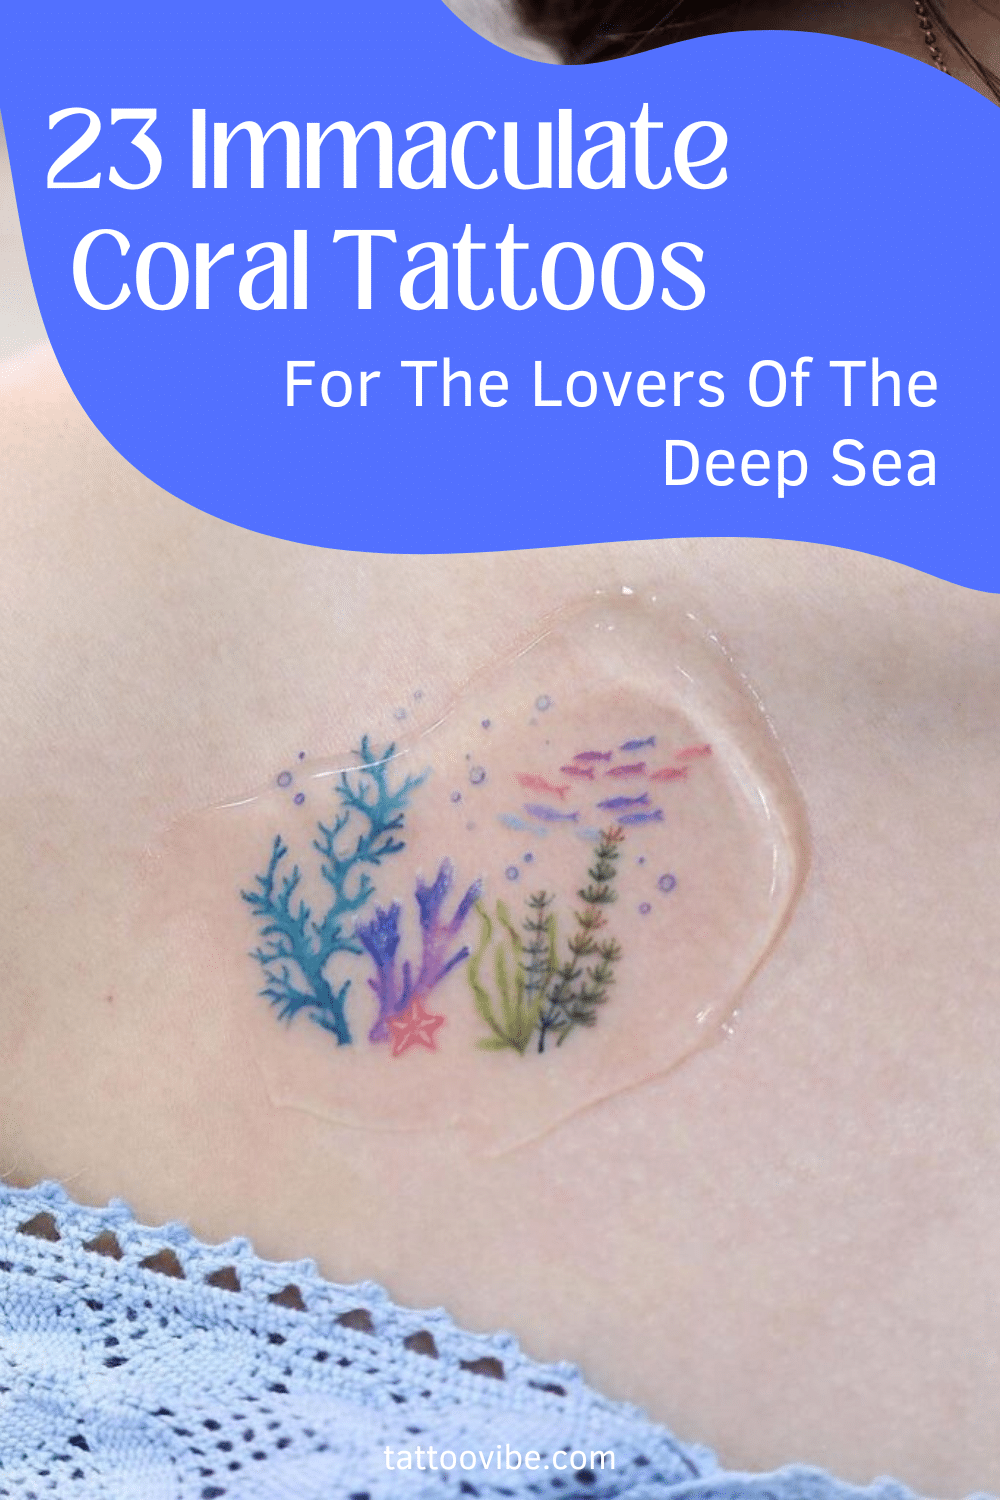 23 Immaculate Coral Tattoos For The Lovers Of The Deep Sea
